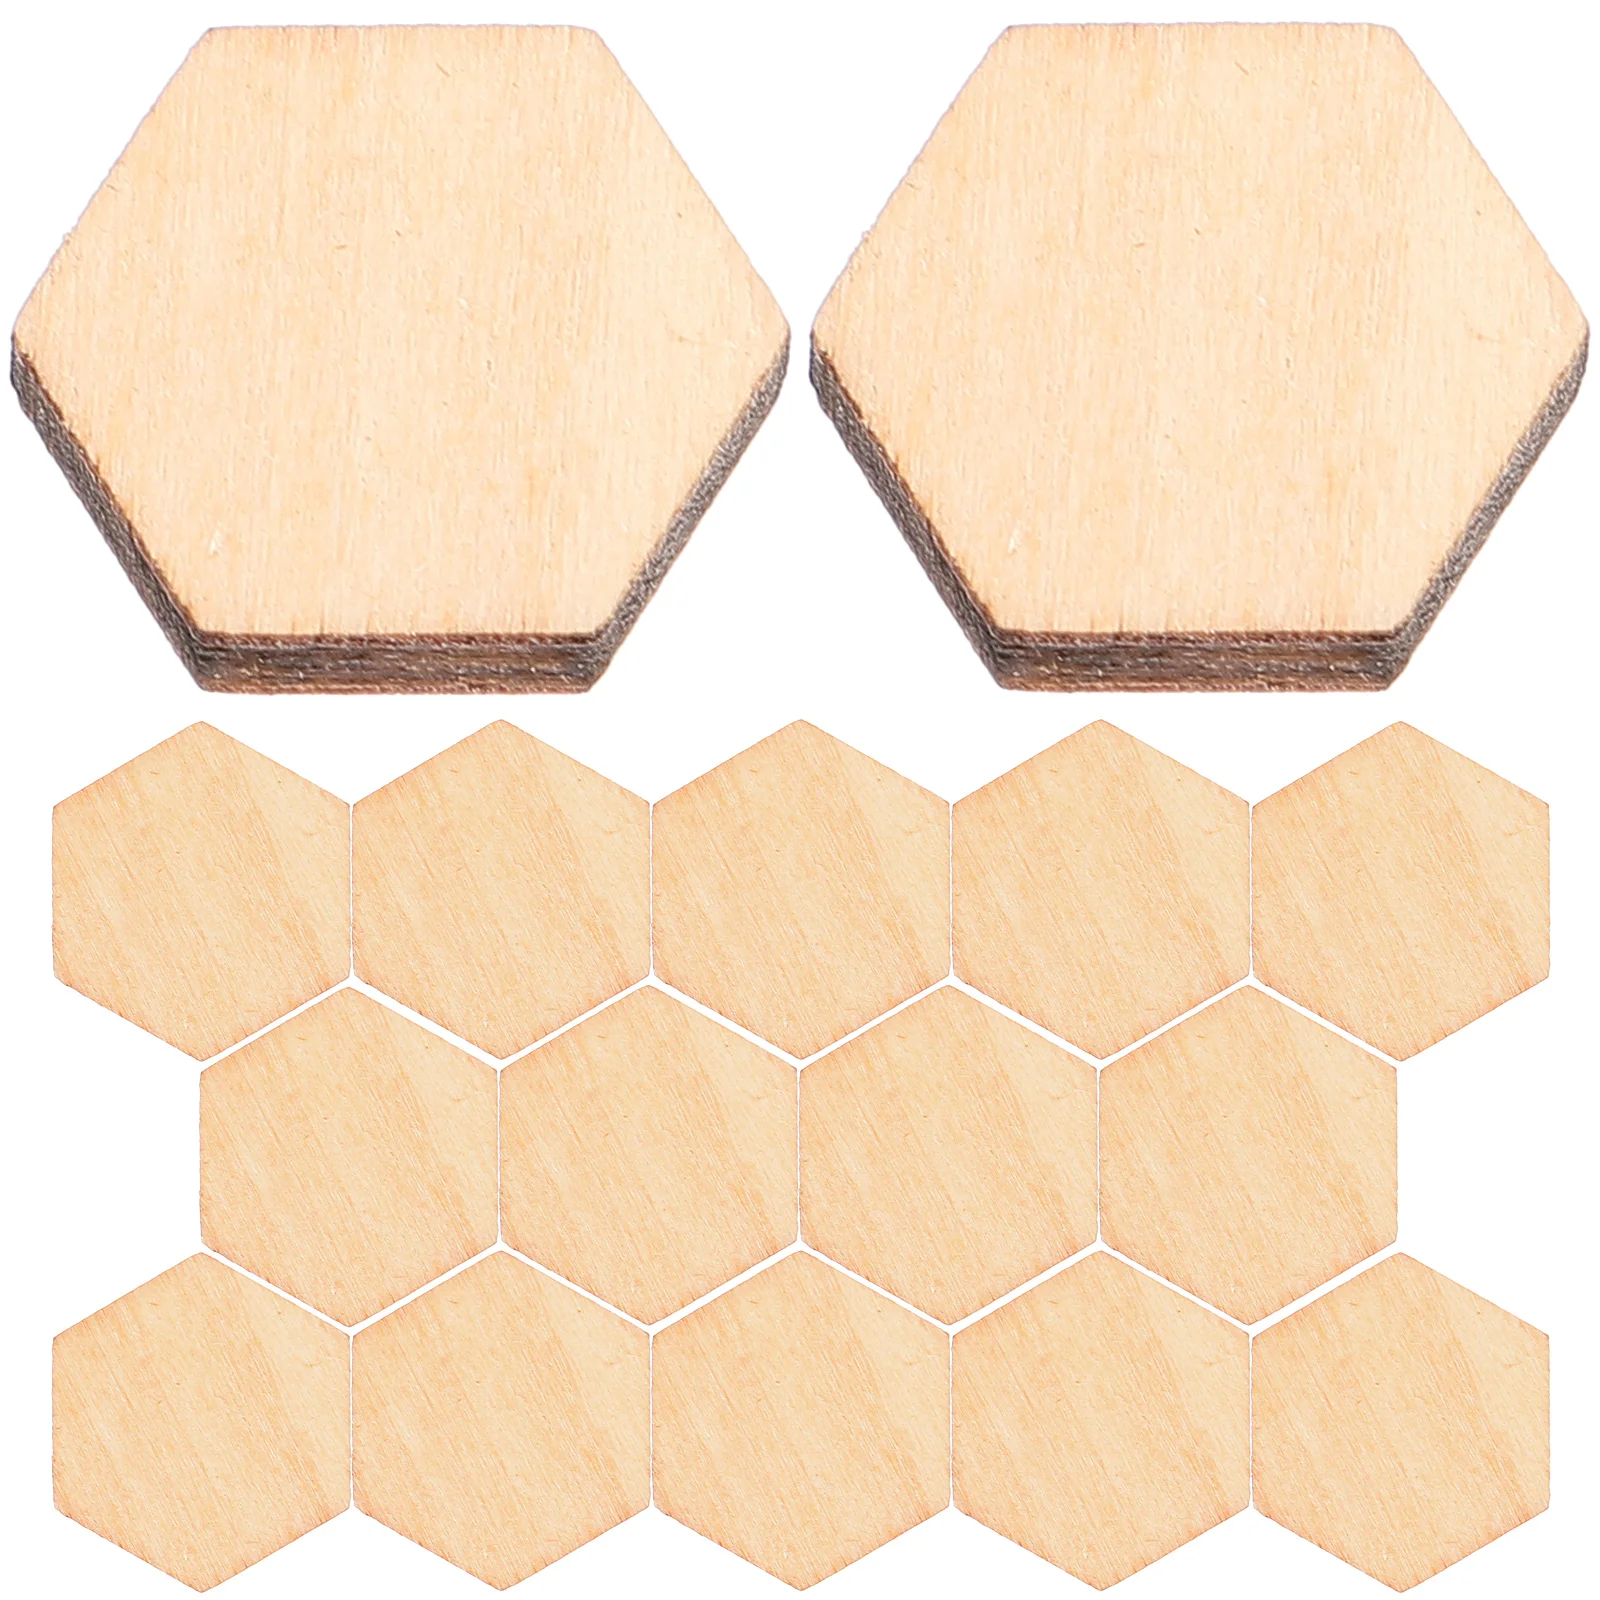 

200Pcs 15mm Wooden Hexagon Pieces Unfinished Wood Chips Day Gift Tags Unpainted Beech Wood Cutout Slices Shapes Ornaments for